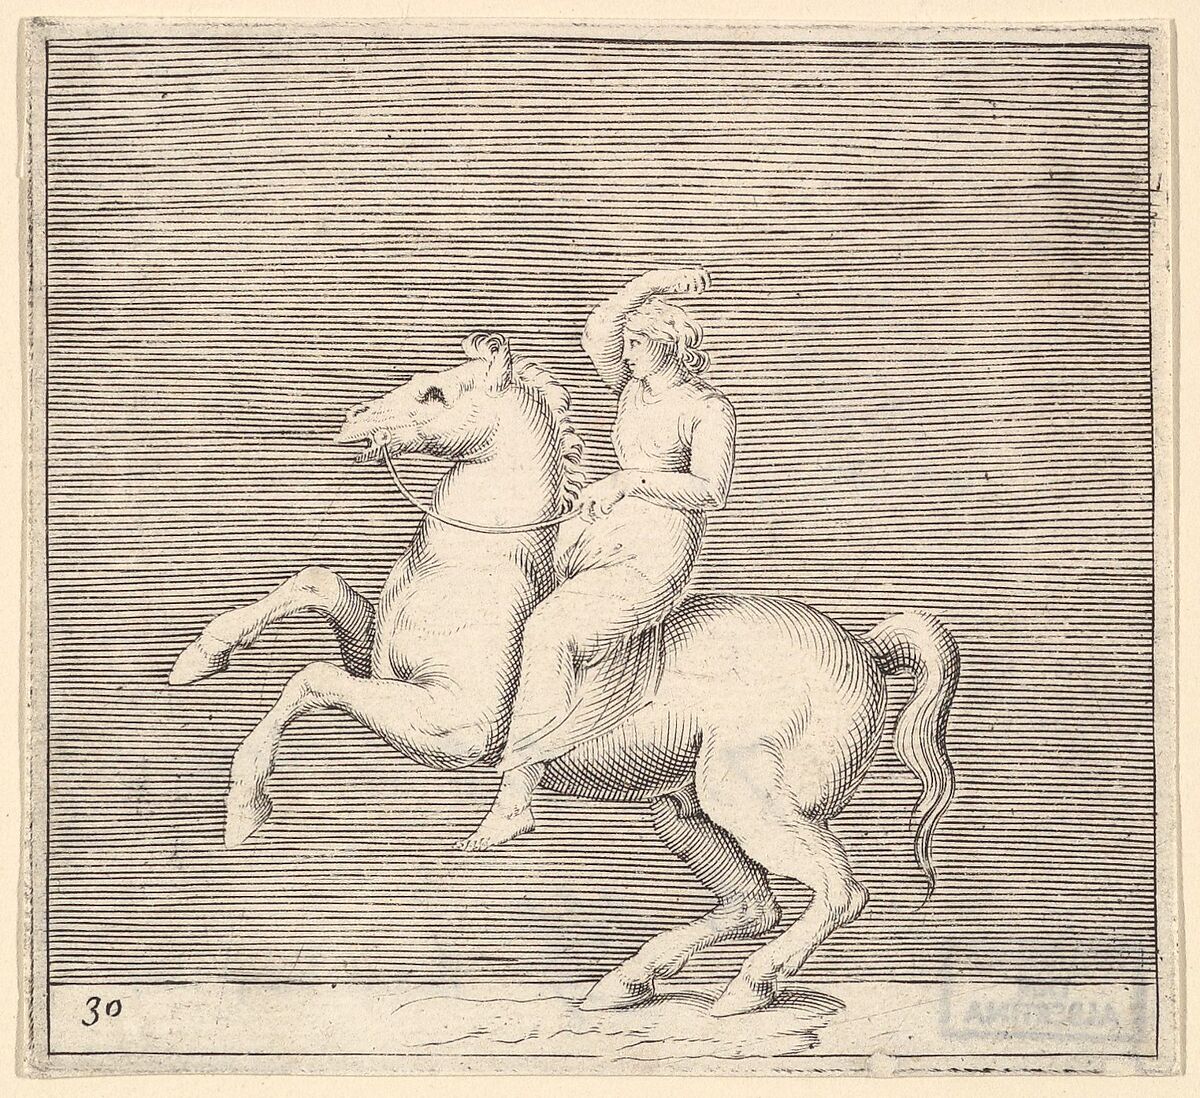 Woman on Rearing Horse, from "Ex Antiquis Cameorum et Gemmae Delineata/ Liber Secundus/et ab Enea Vico Parmen Incis", Anonymous, Italian, 16th century, Engraving; third state 